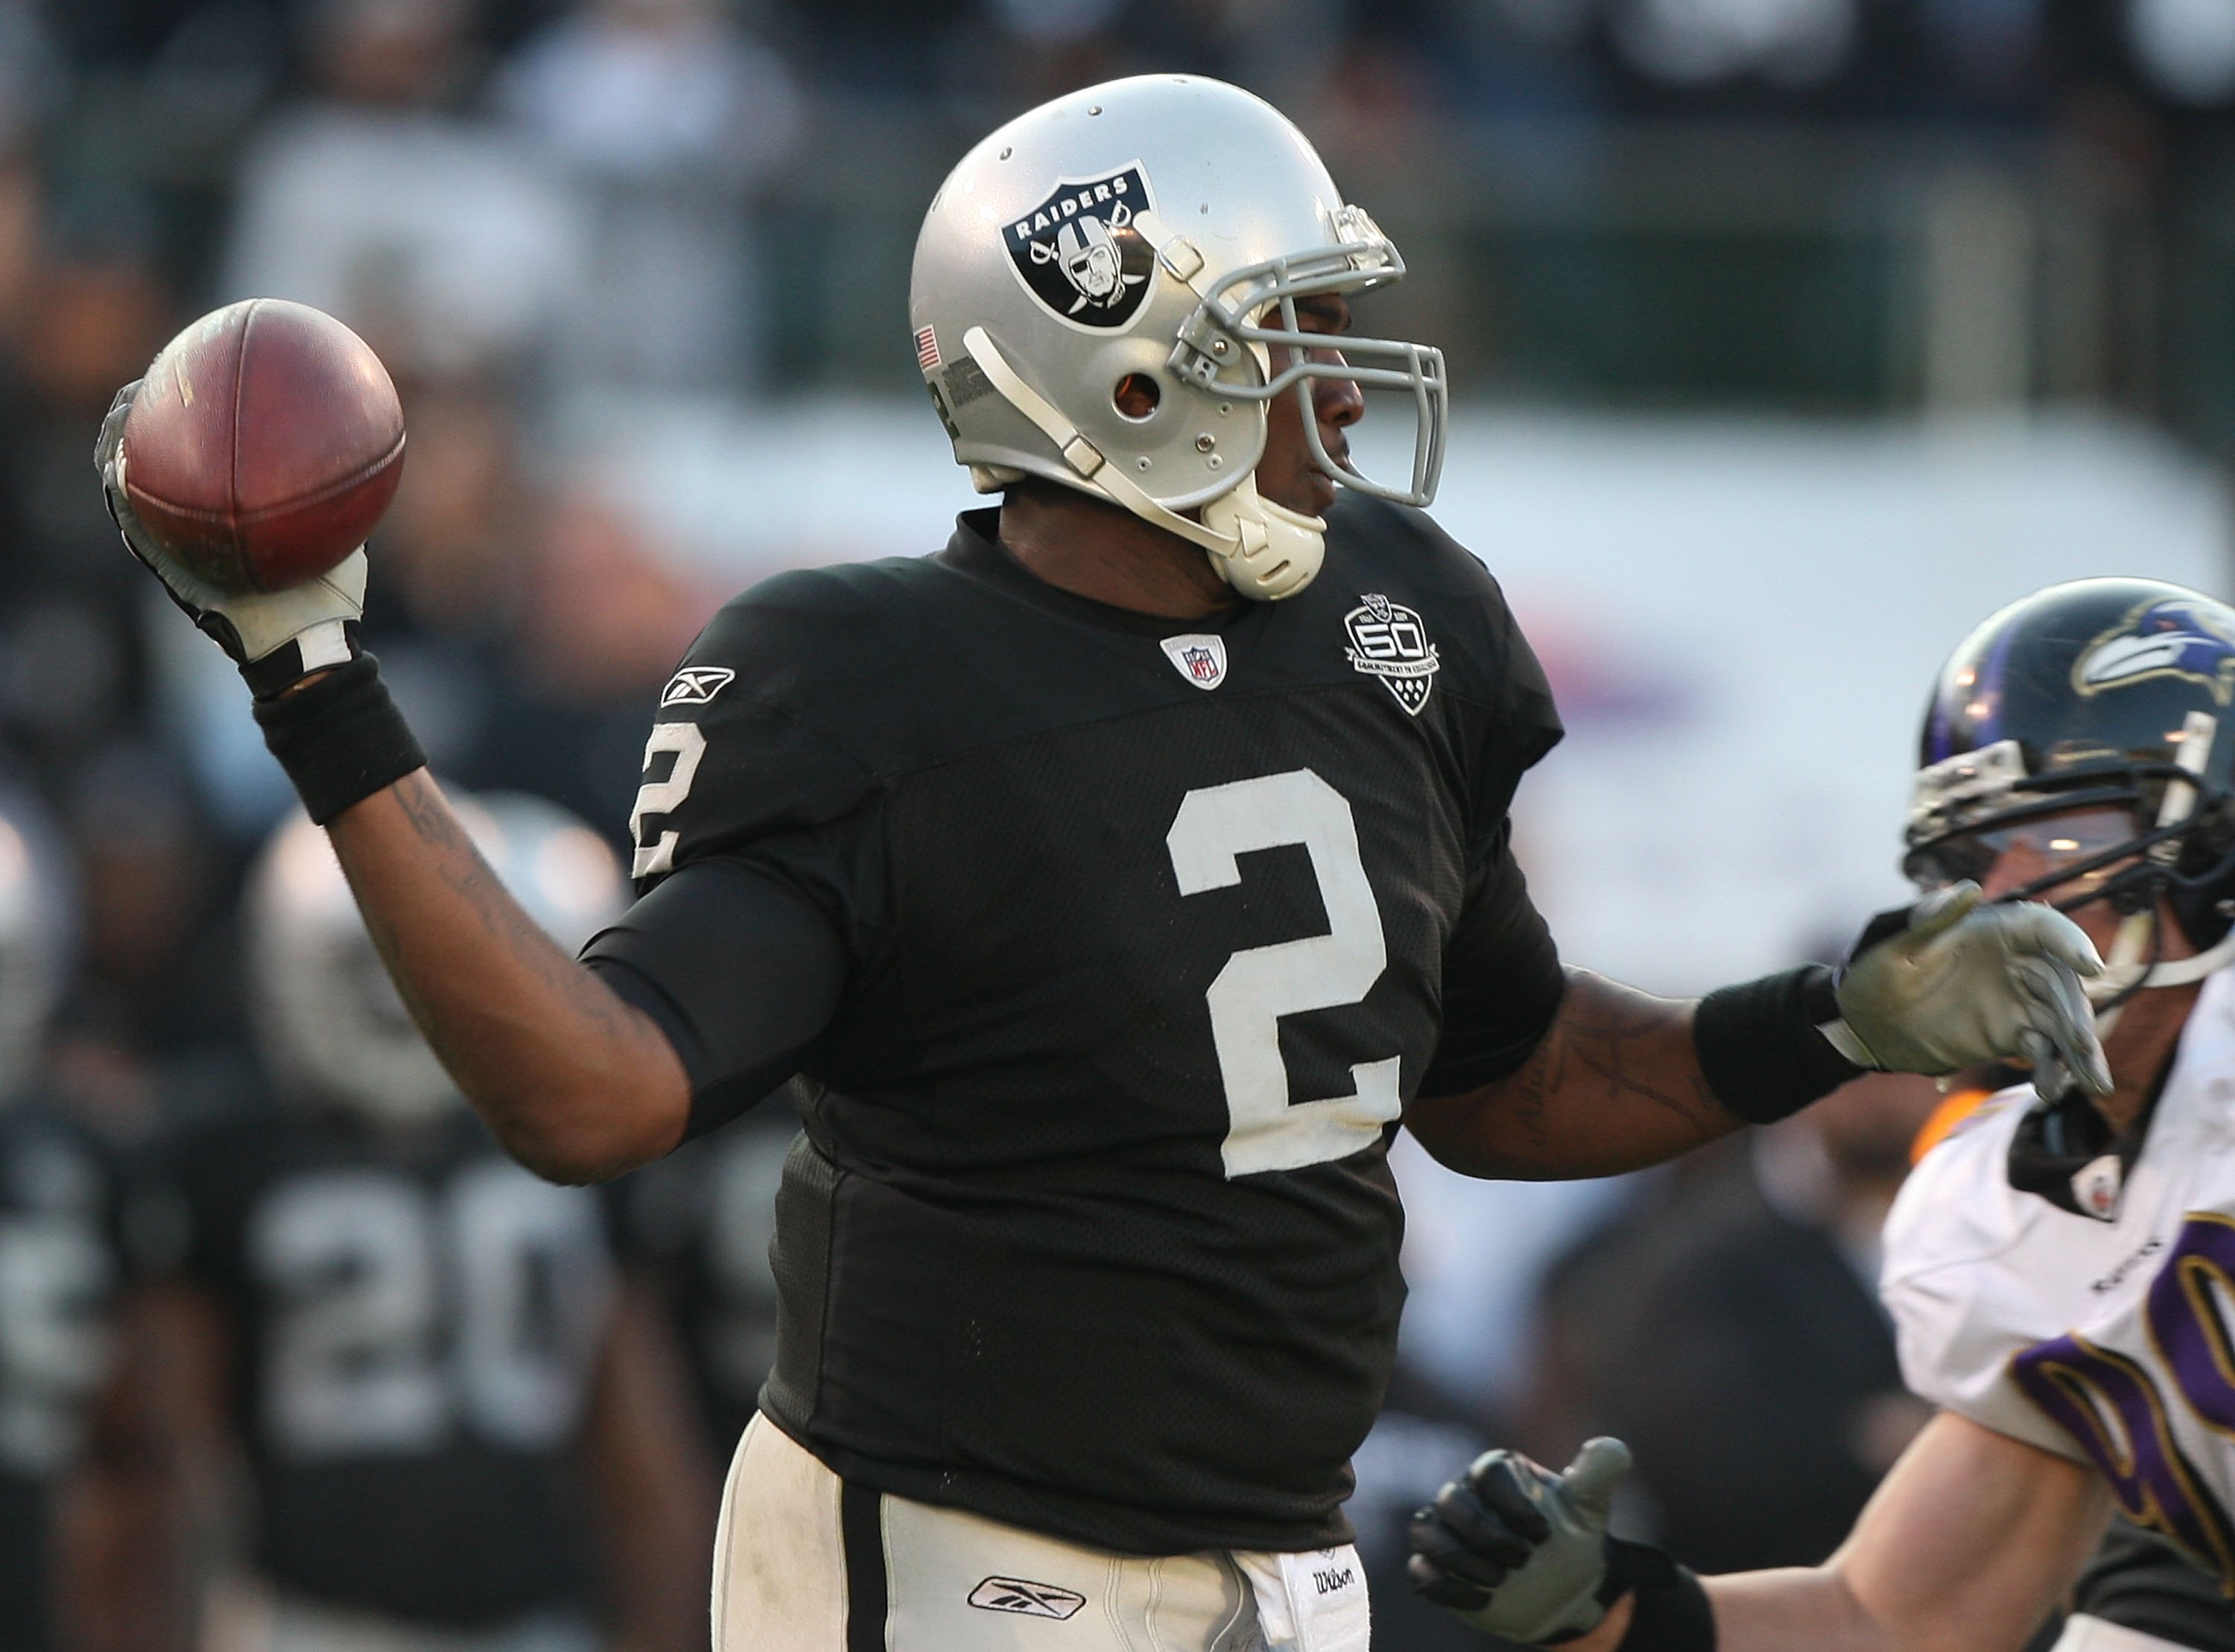 OAKLAND, CA - JANUARY 03:  JaMarcus Russell #2 of the Oakland Raiders in action  against the Baltimore Ravens during an NFL game at Oakland-Alameda County Coliseum on January 3, 2010 in Oakland, California.  (Photo by Jed Jacobsohn/Getty Images)